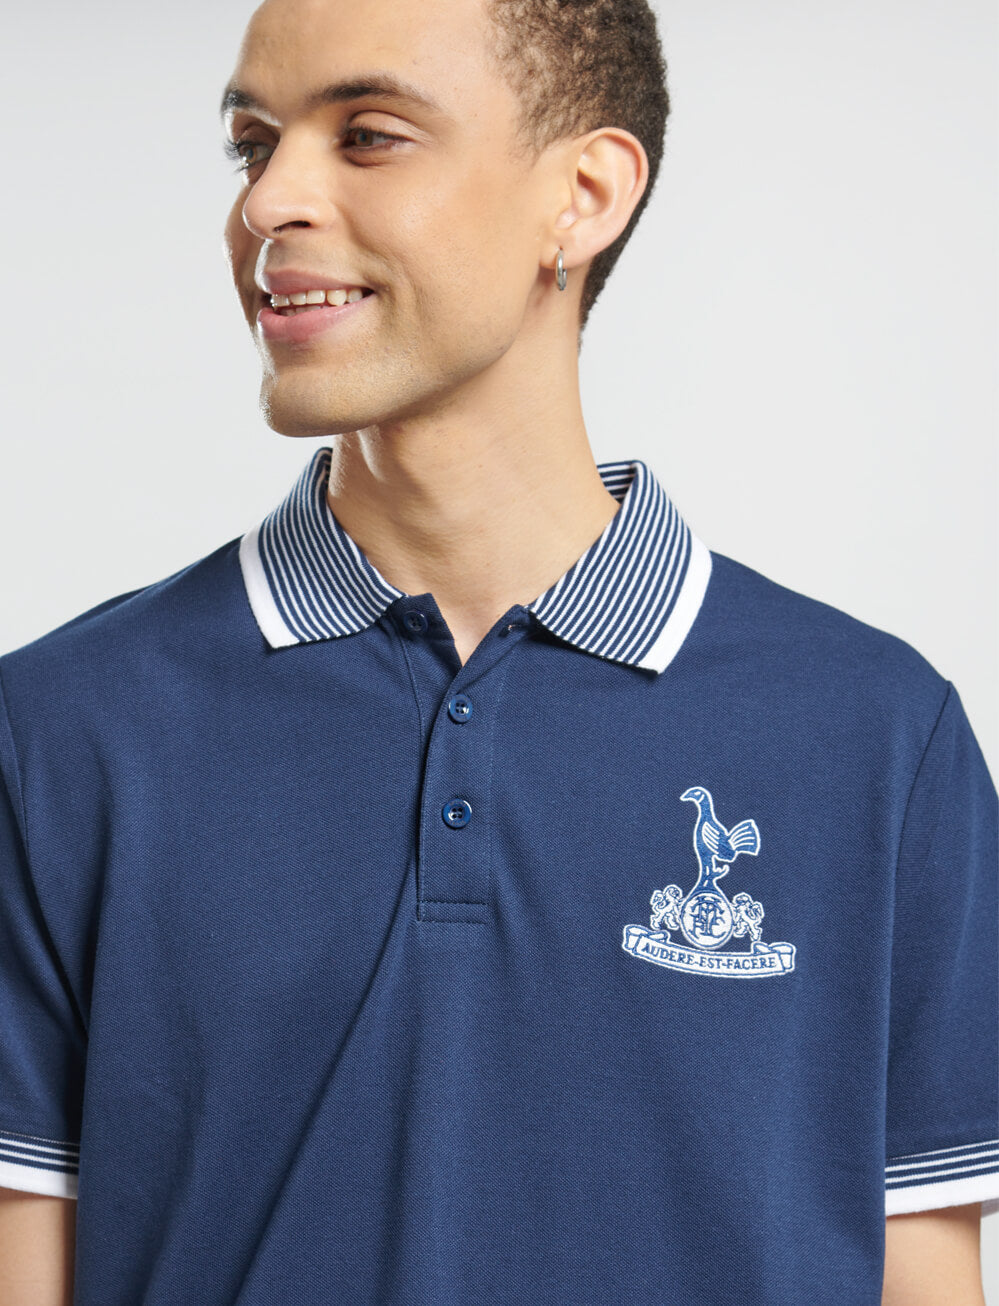 Official Tottenham Tipped Polo - Navy - The World Football Store